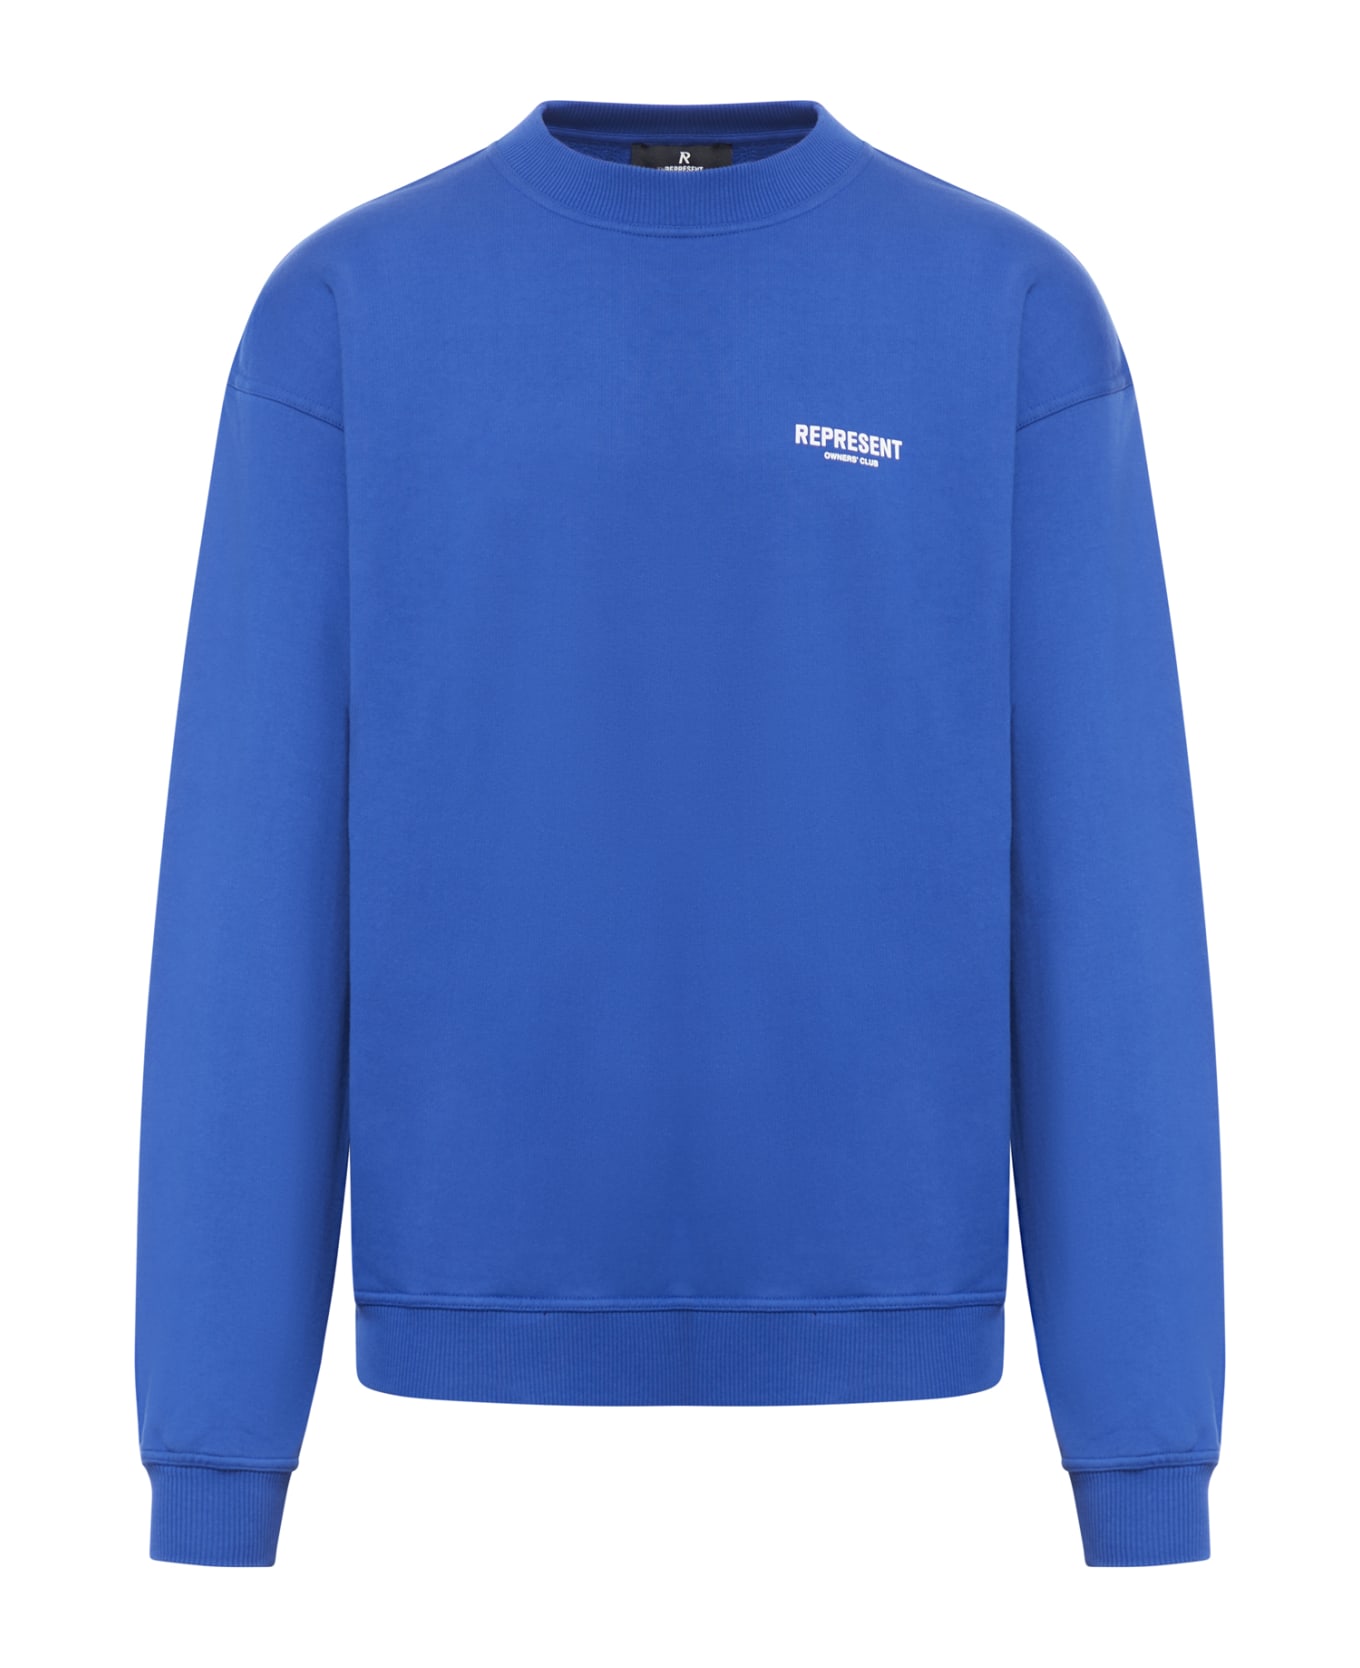 REPRESENT Owners Club Sweater - Cobalt Blue